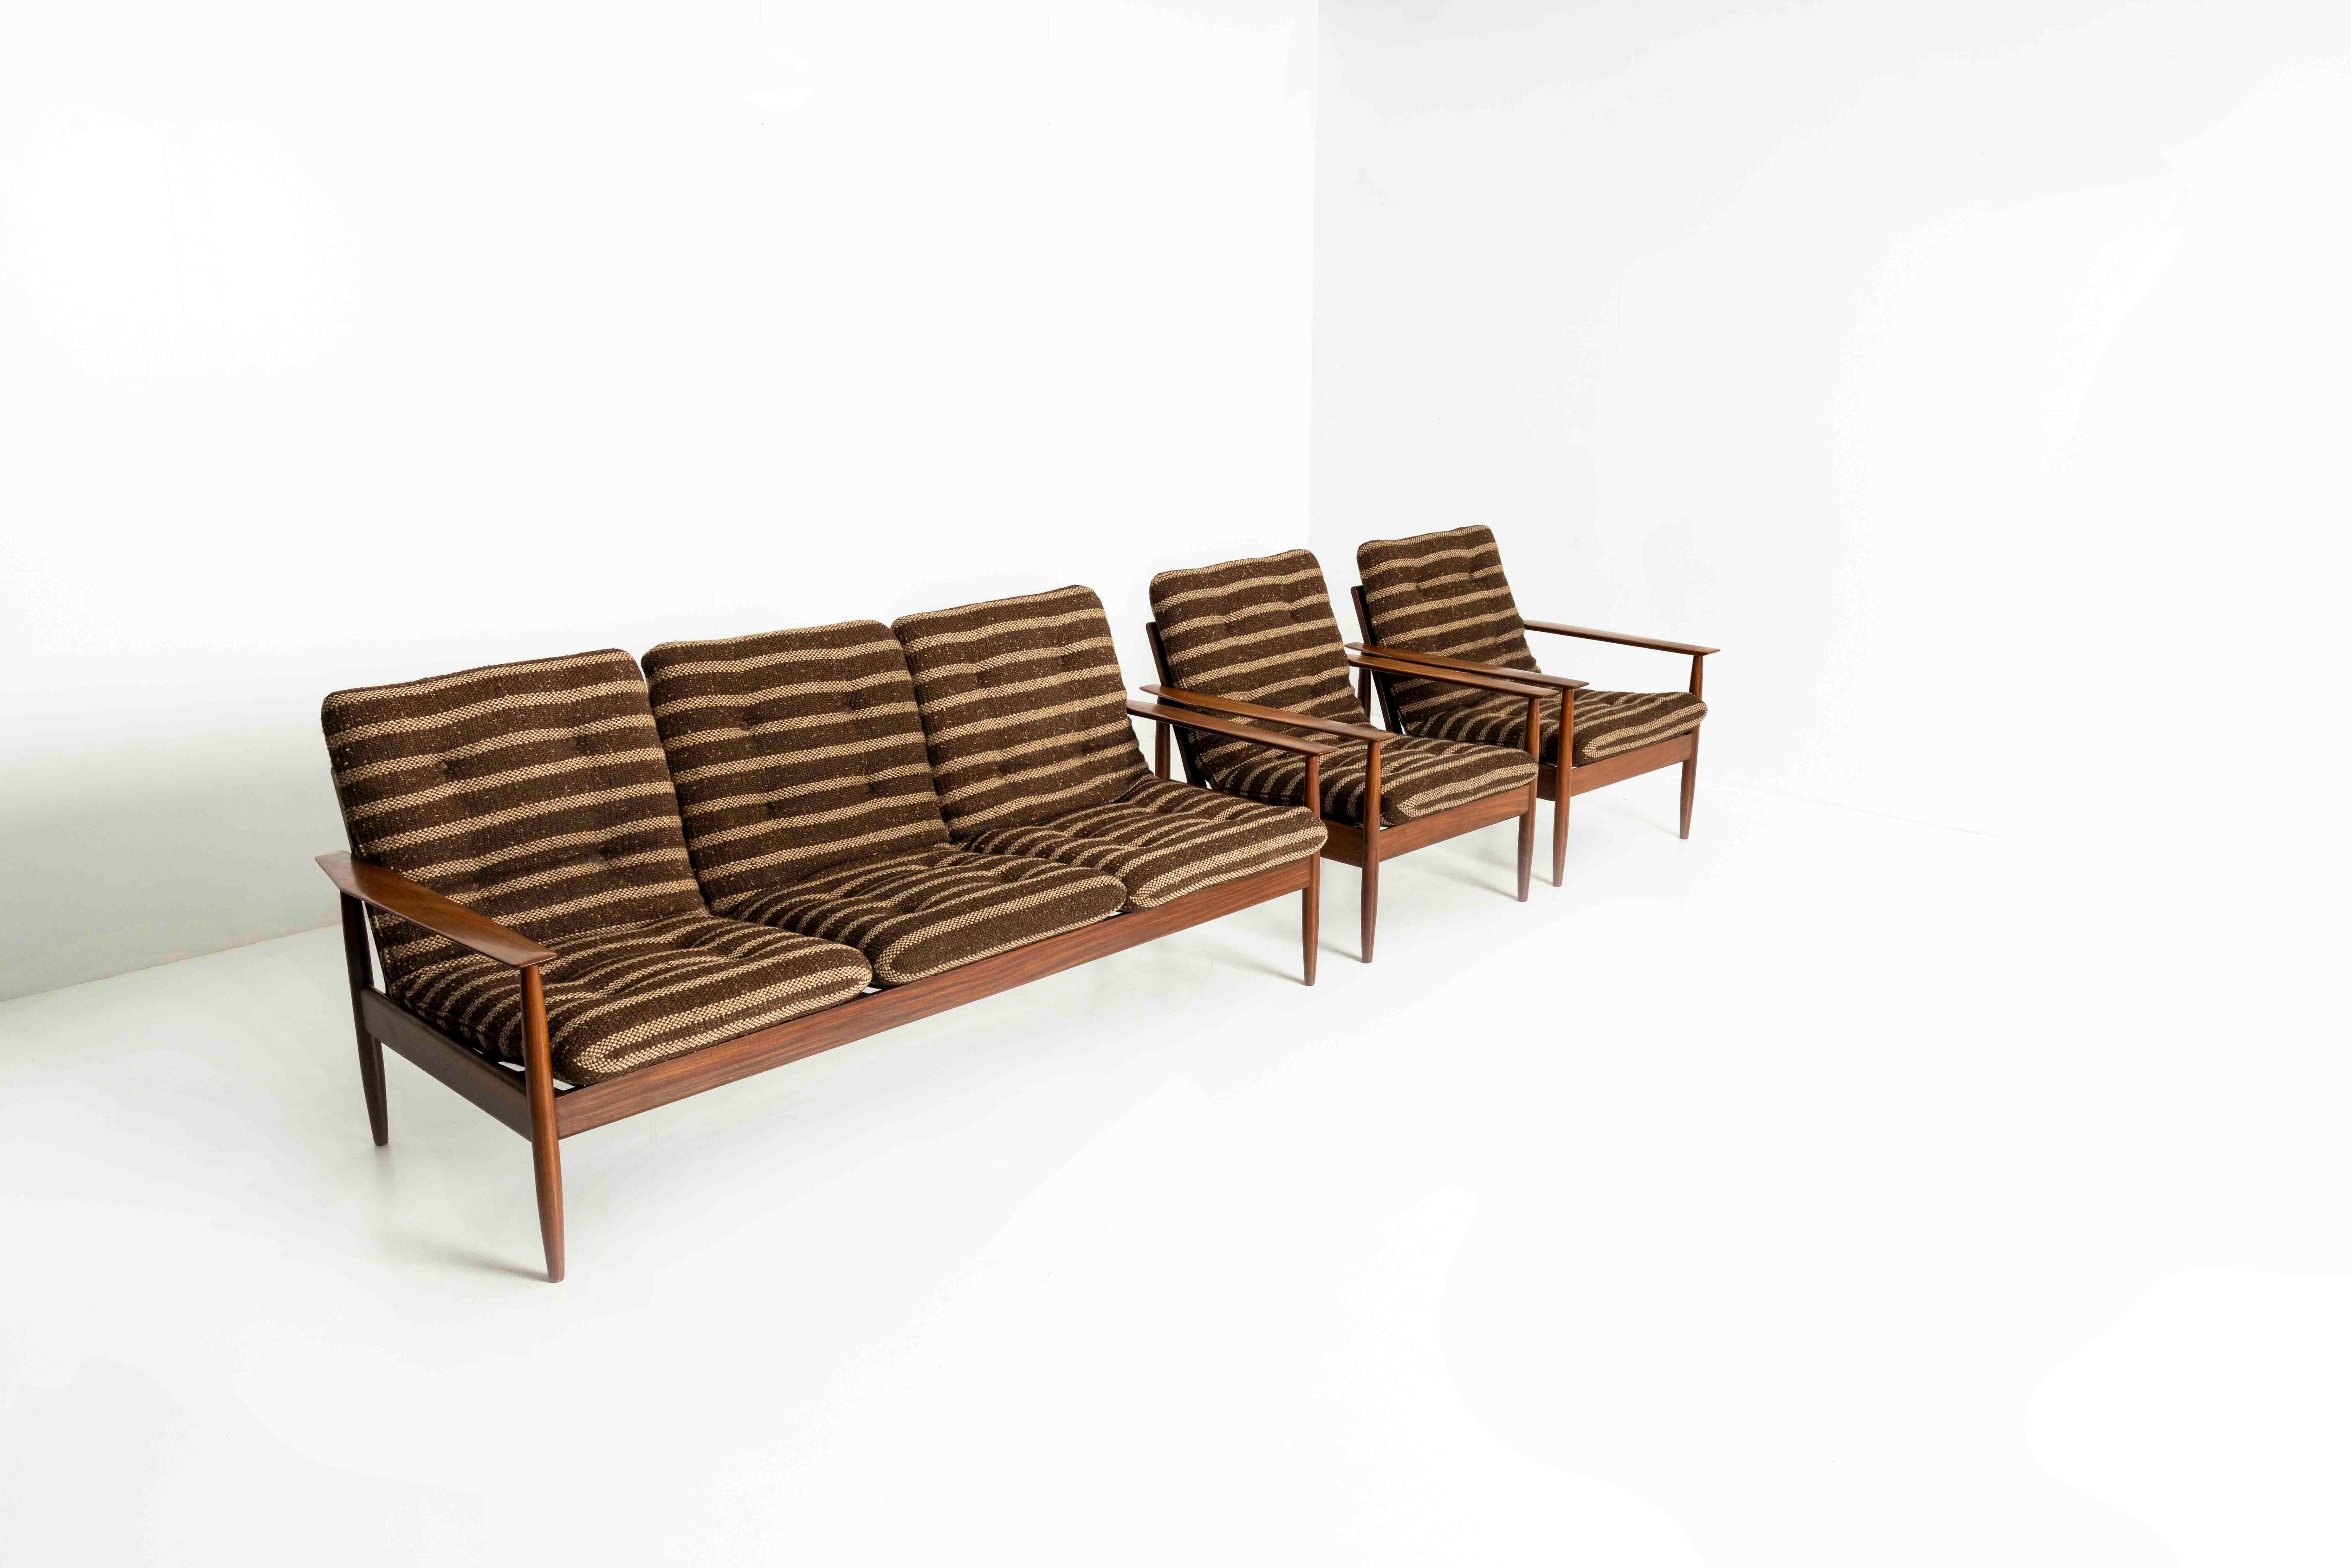 Mid-20th Century Vintage Danish Sofa in the Style of Grete Jalk, 1960s Denmark